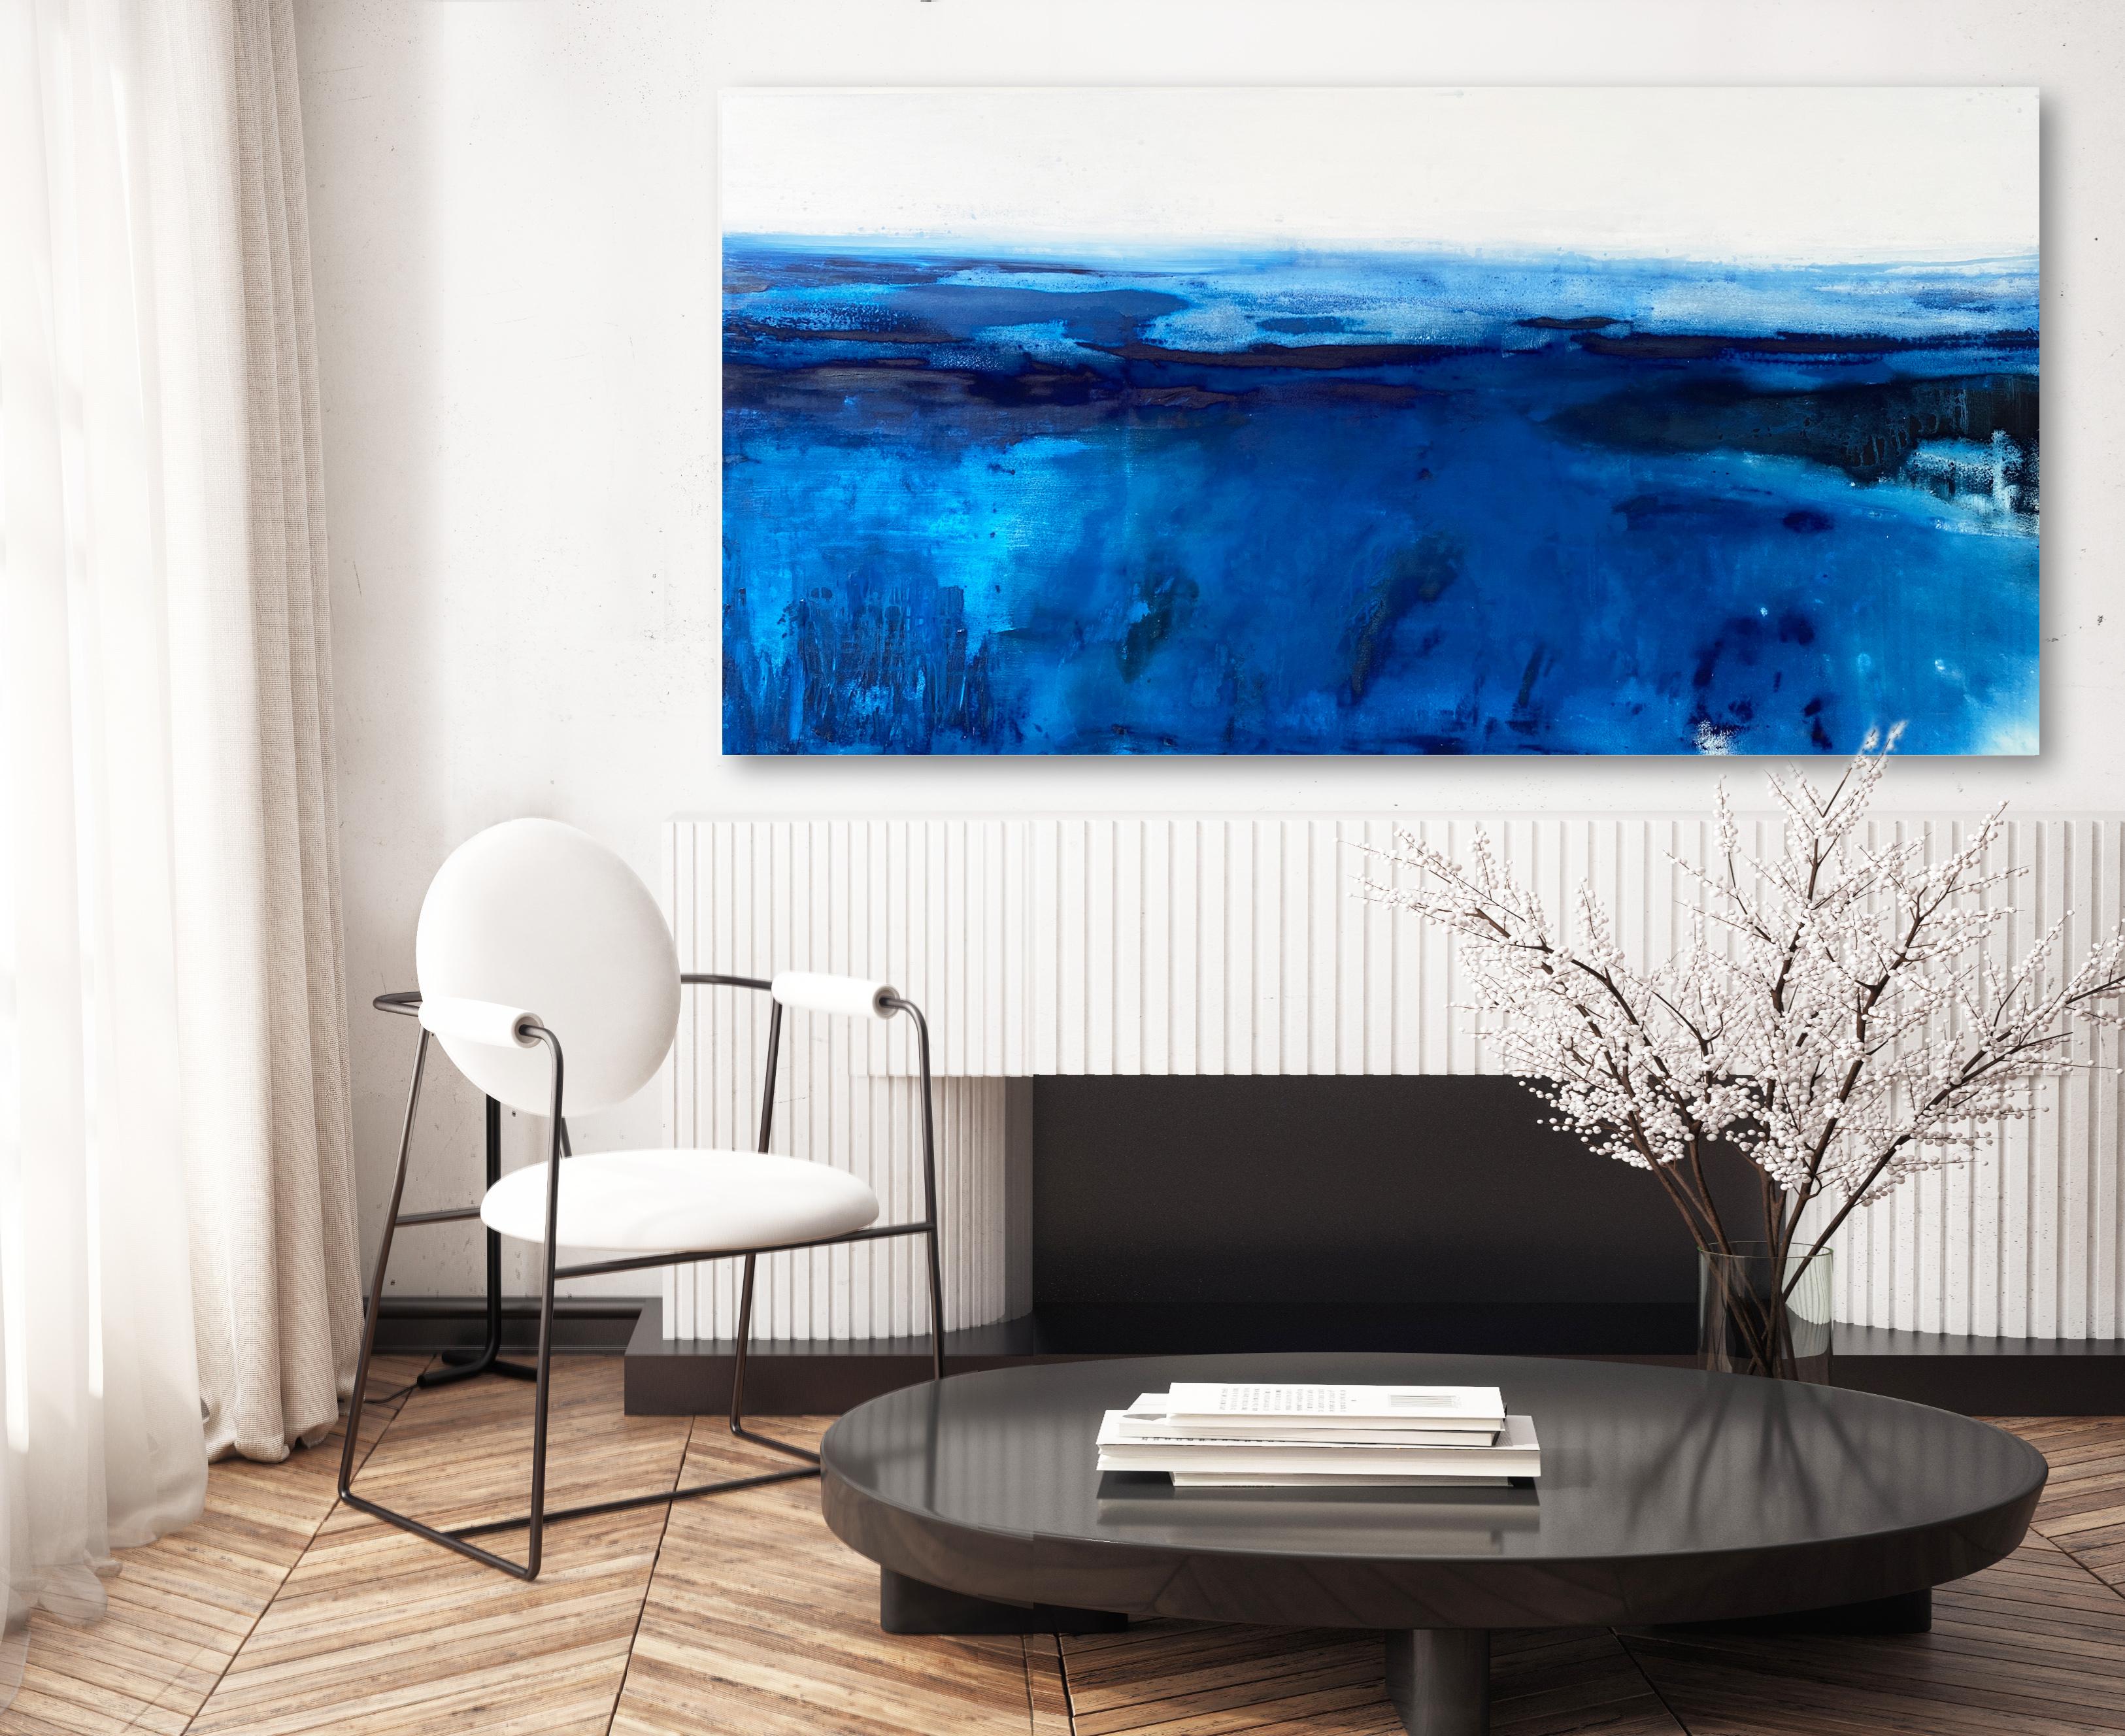 Large ocean abstract impressionist landscape water sky cloud cobalt blue white  - Painting by Kathleen Rhee